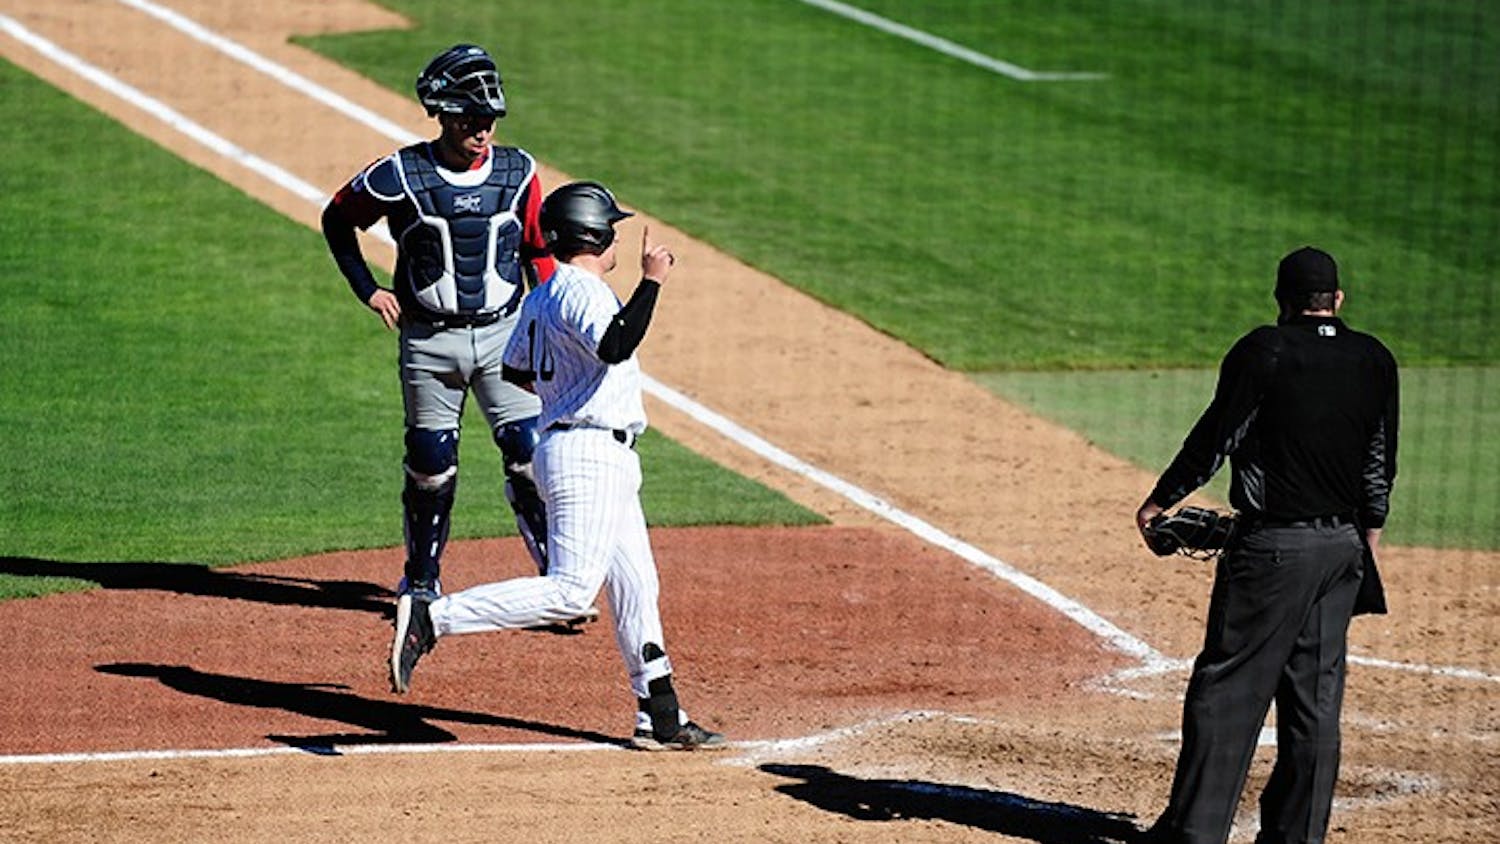 Sophomore catcher Colin Burgess scores against Dayton. South Carolina swept the three-game series against the Flyers to open the 2021 season.